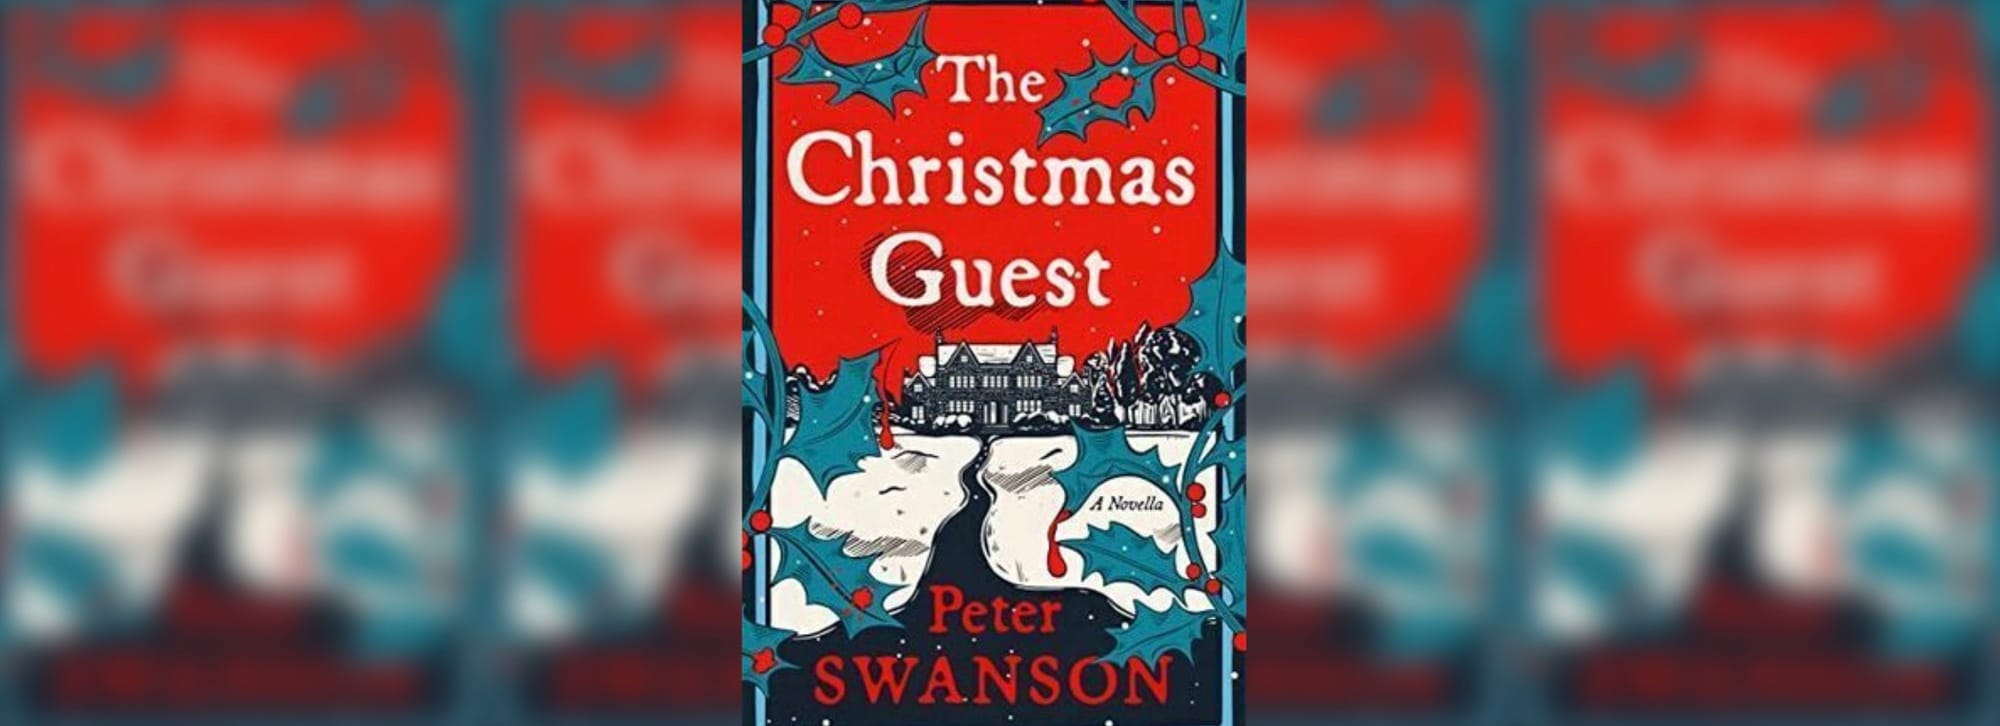 The Christmas Guest Book Review